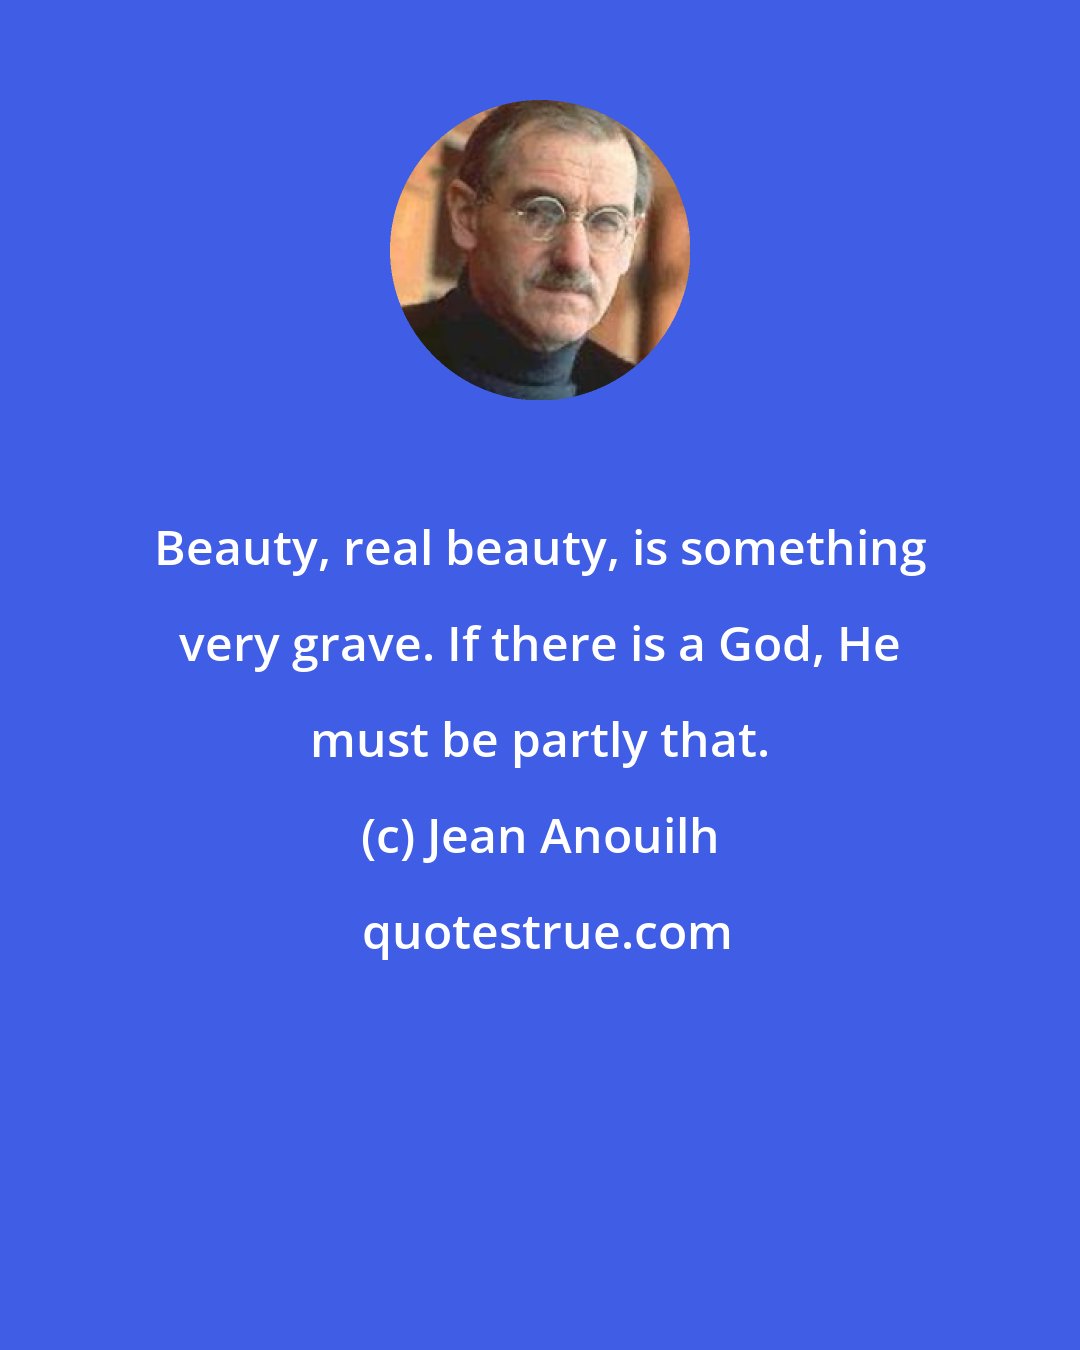 Jean Anouilh: Beauty, real beauty, is something very grave. If there is a God, He must be partly that.